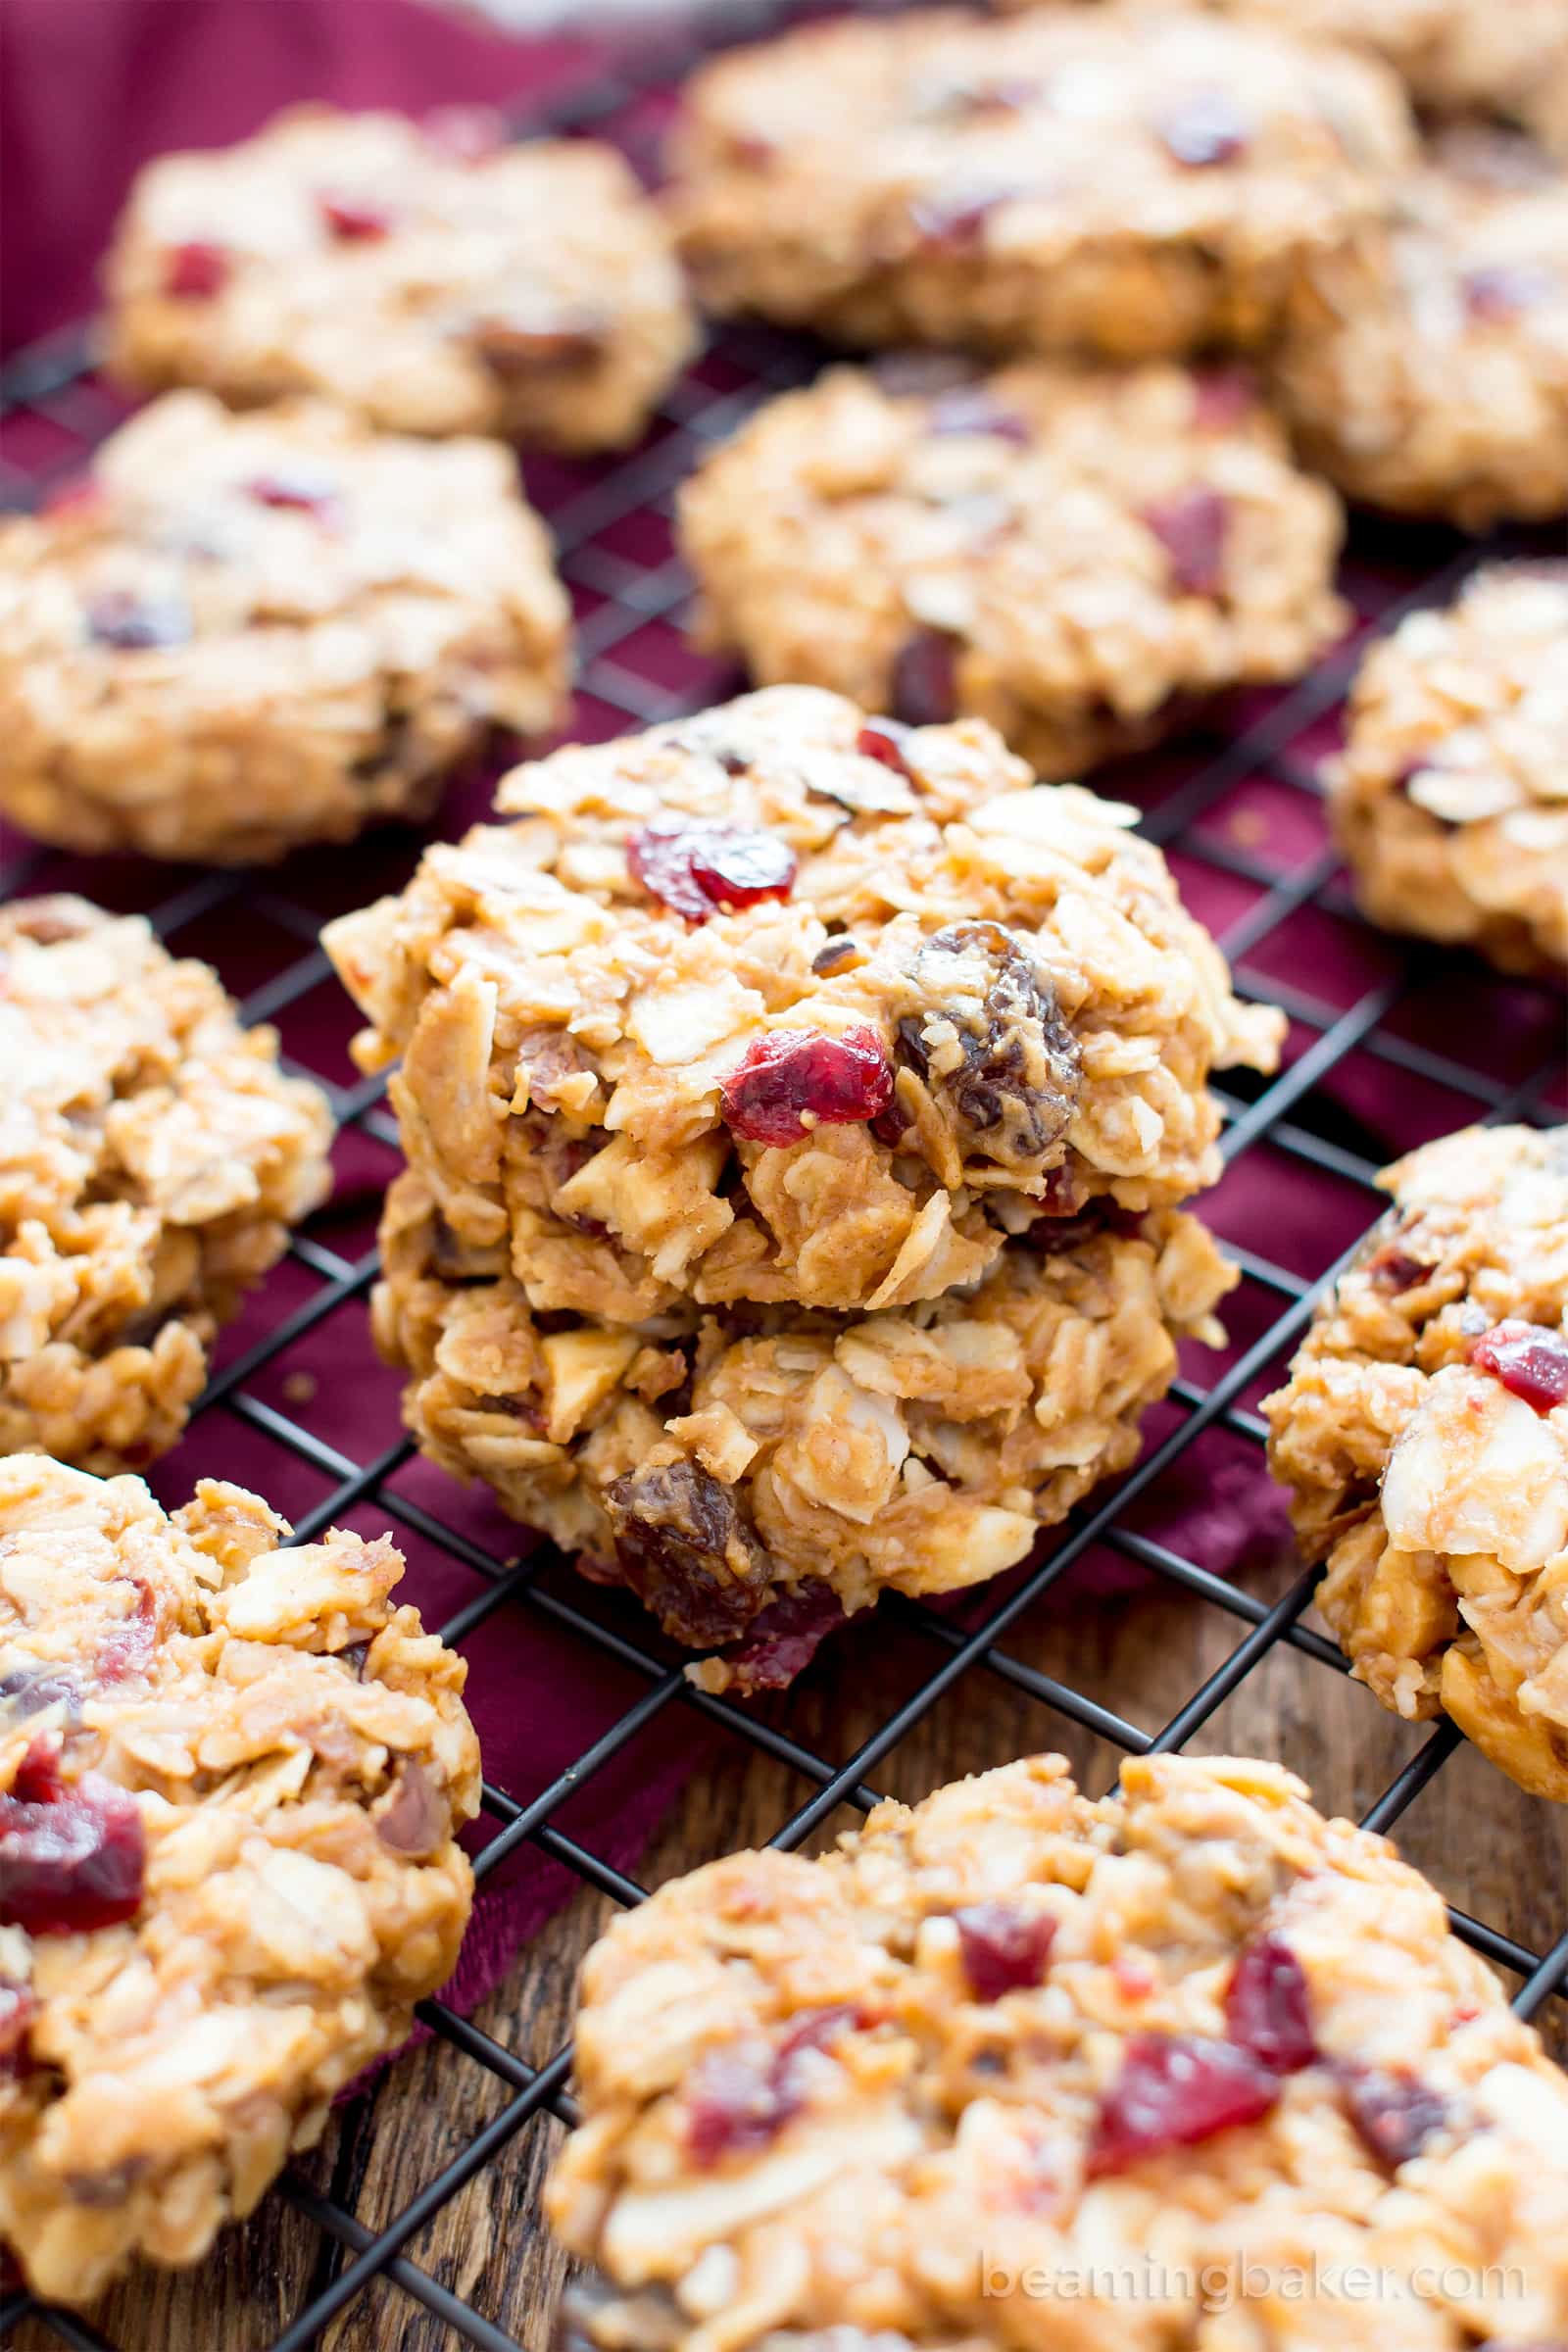 No Bake Gluten Free Peanut Butter Fruit & Nut Cookies (V, GF, DF): an easy, one bowl recipe for no bake peanut butter cookies bursting with dried fruits and nuts! #ProteinPacked #Vegan #GlutenFree #DairyFree BeamingBaker.com